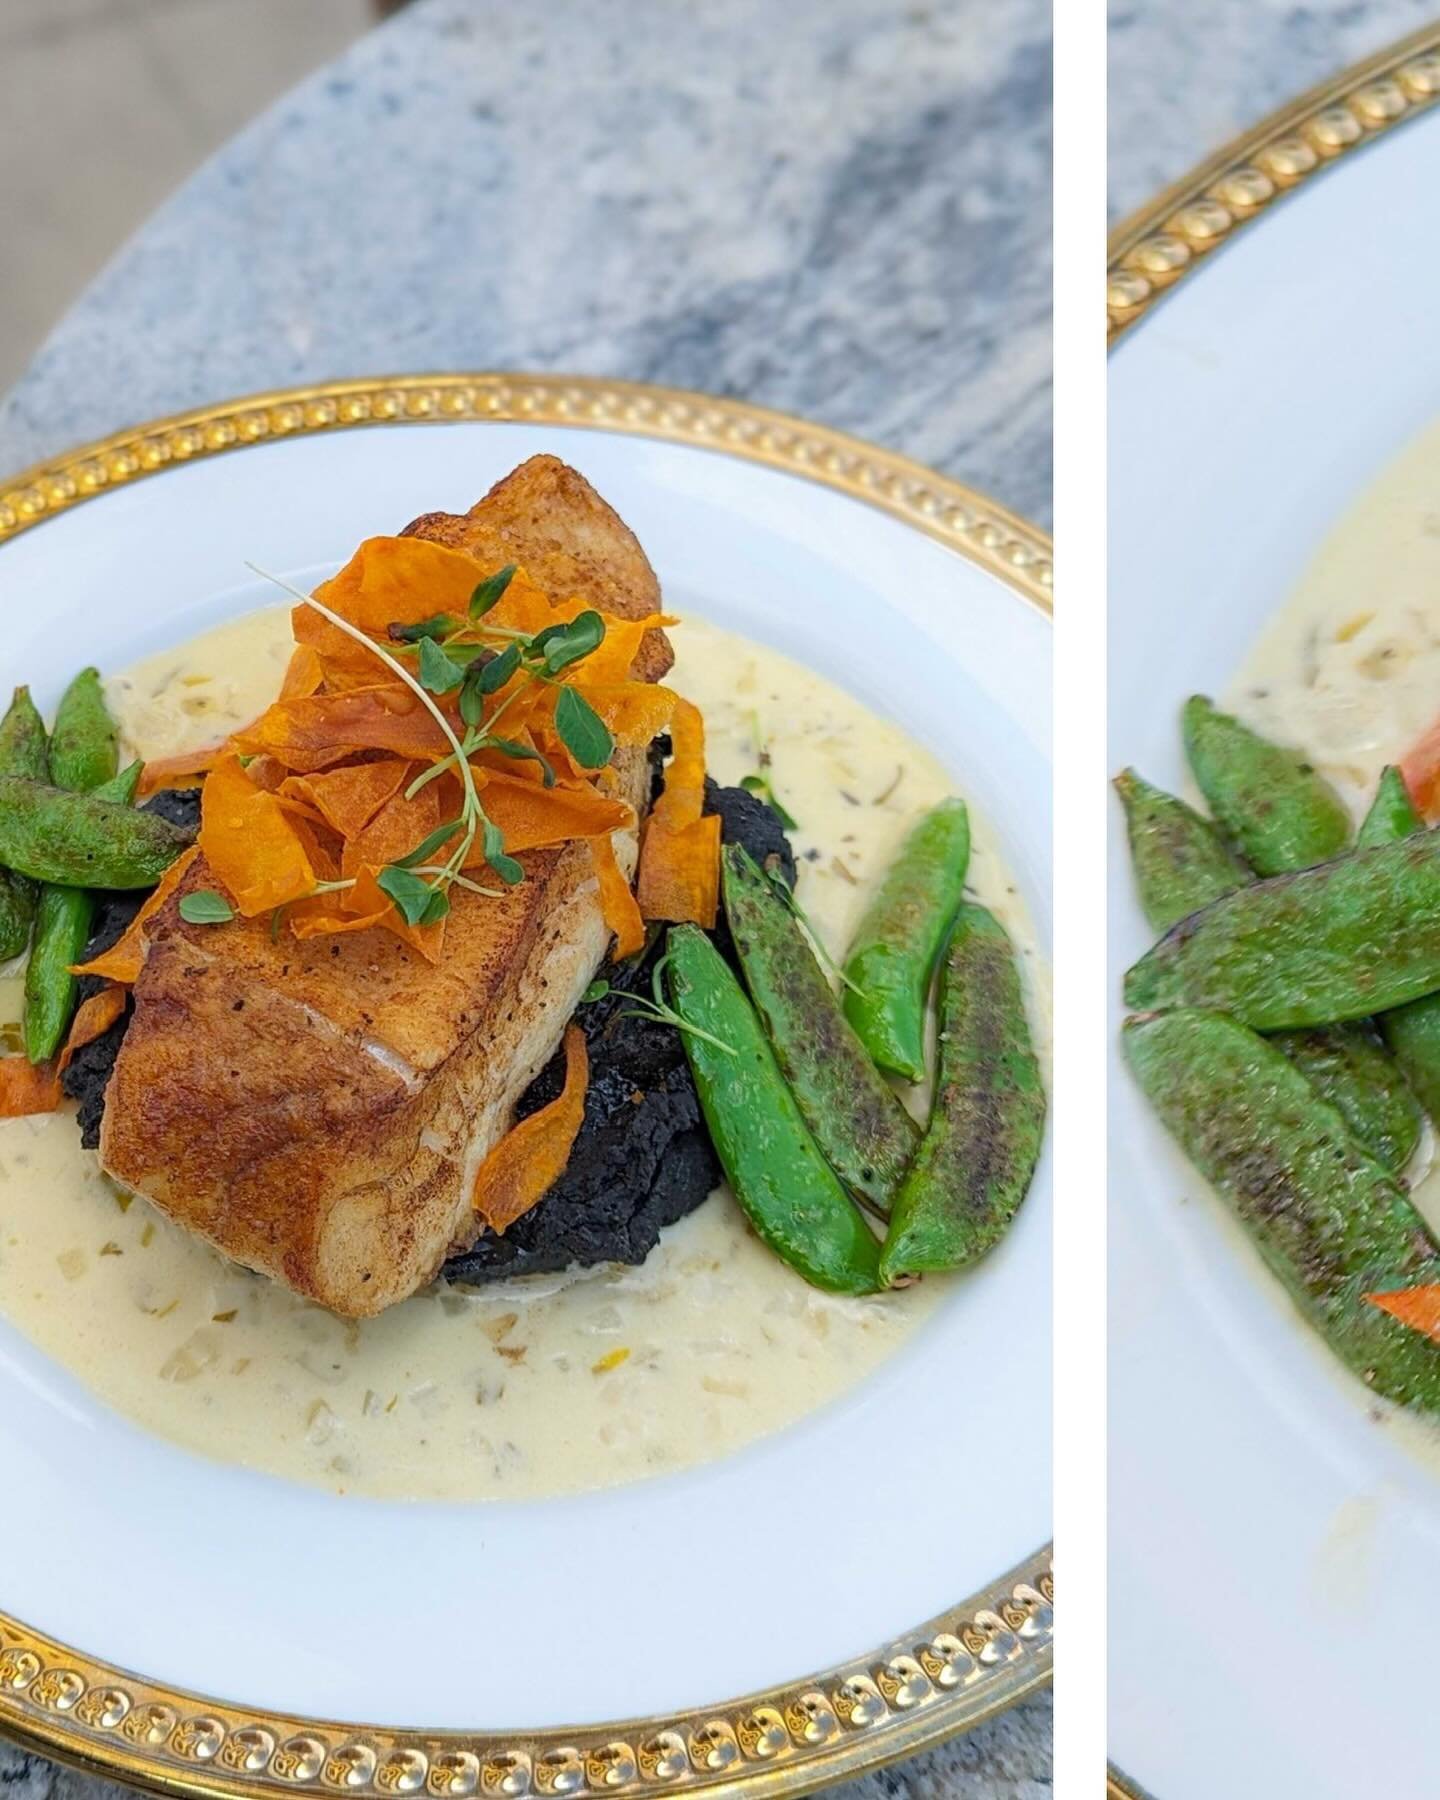 We love a summer menu refresh! emphasis on the *fresh*

This butter pan-seared halibut features some of our favorite garden flavors. Served over a black lima bean pur&eacute;e with saut&eacute;ed snap peas and crispy sweet potatoes, the entire dish i